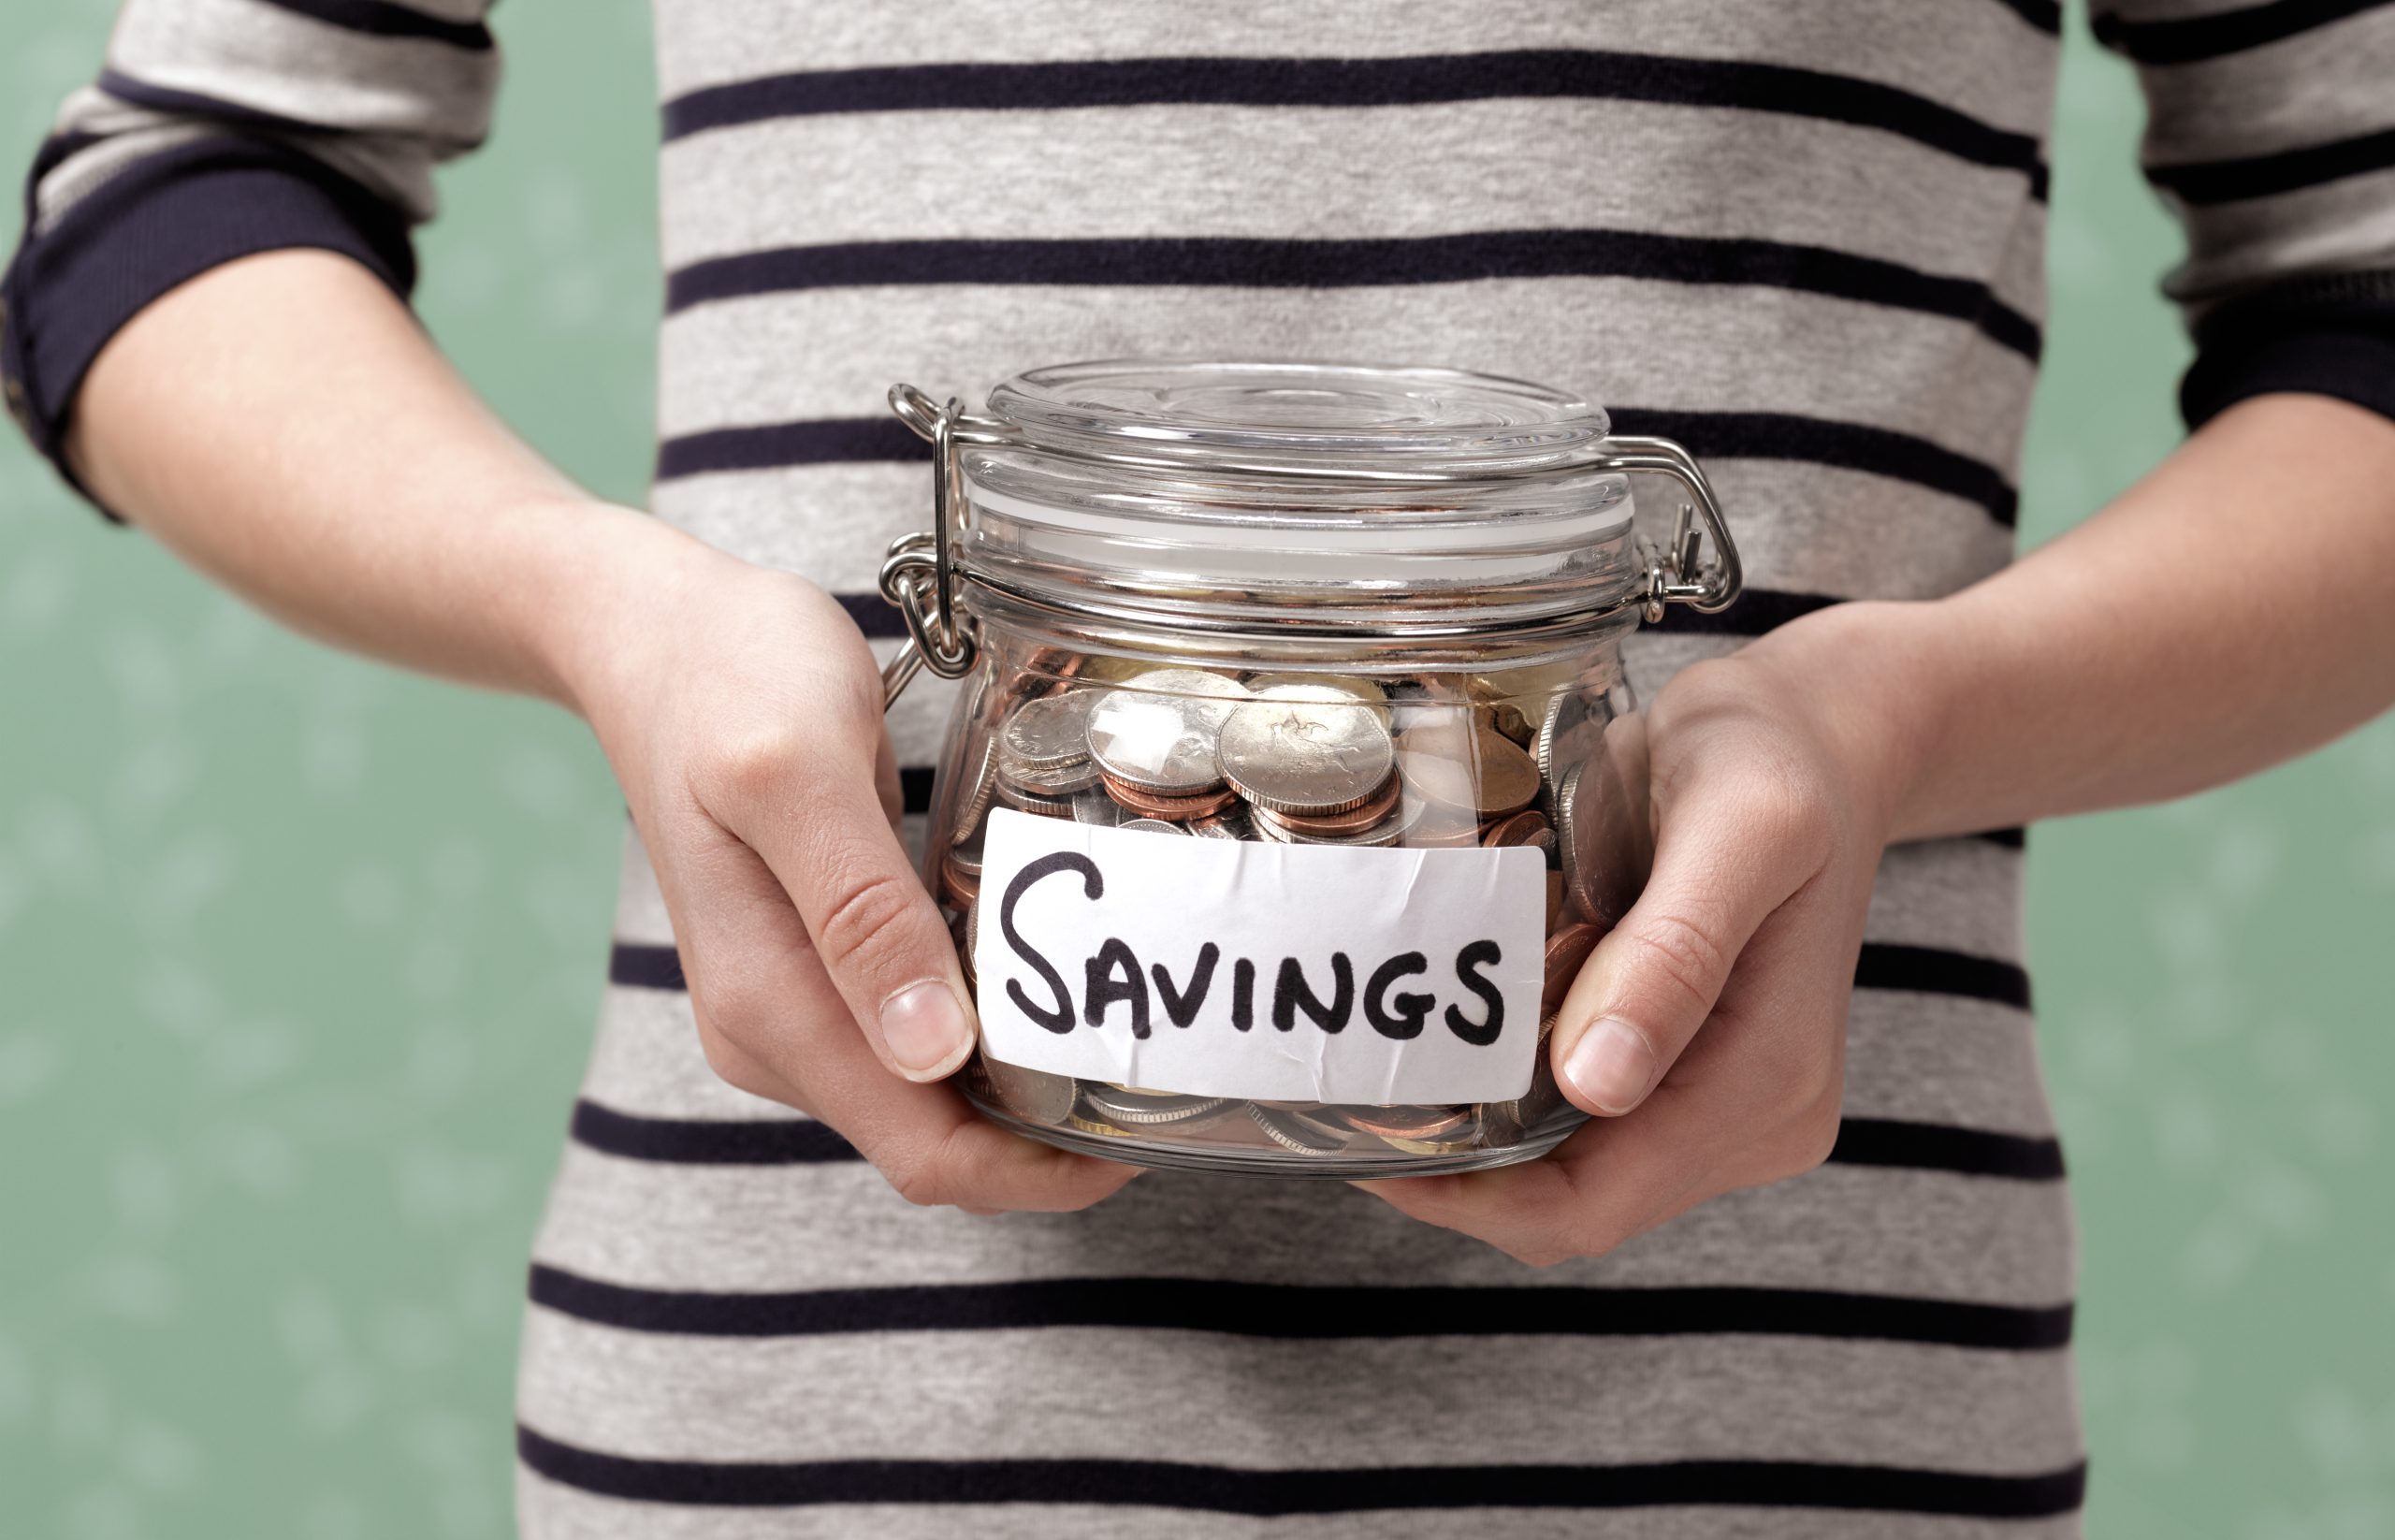 Gen Z’s Saving More Than Other Generations to Feel Financially Prepared